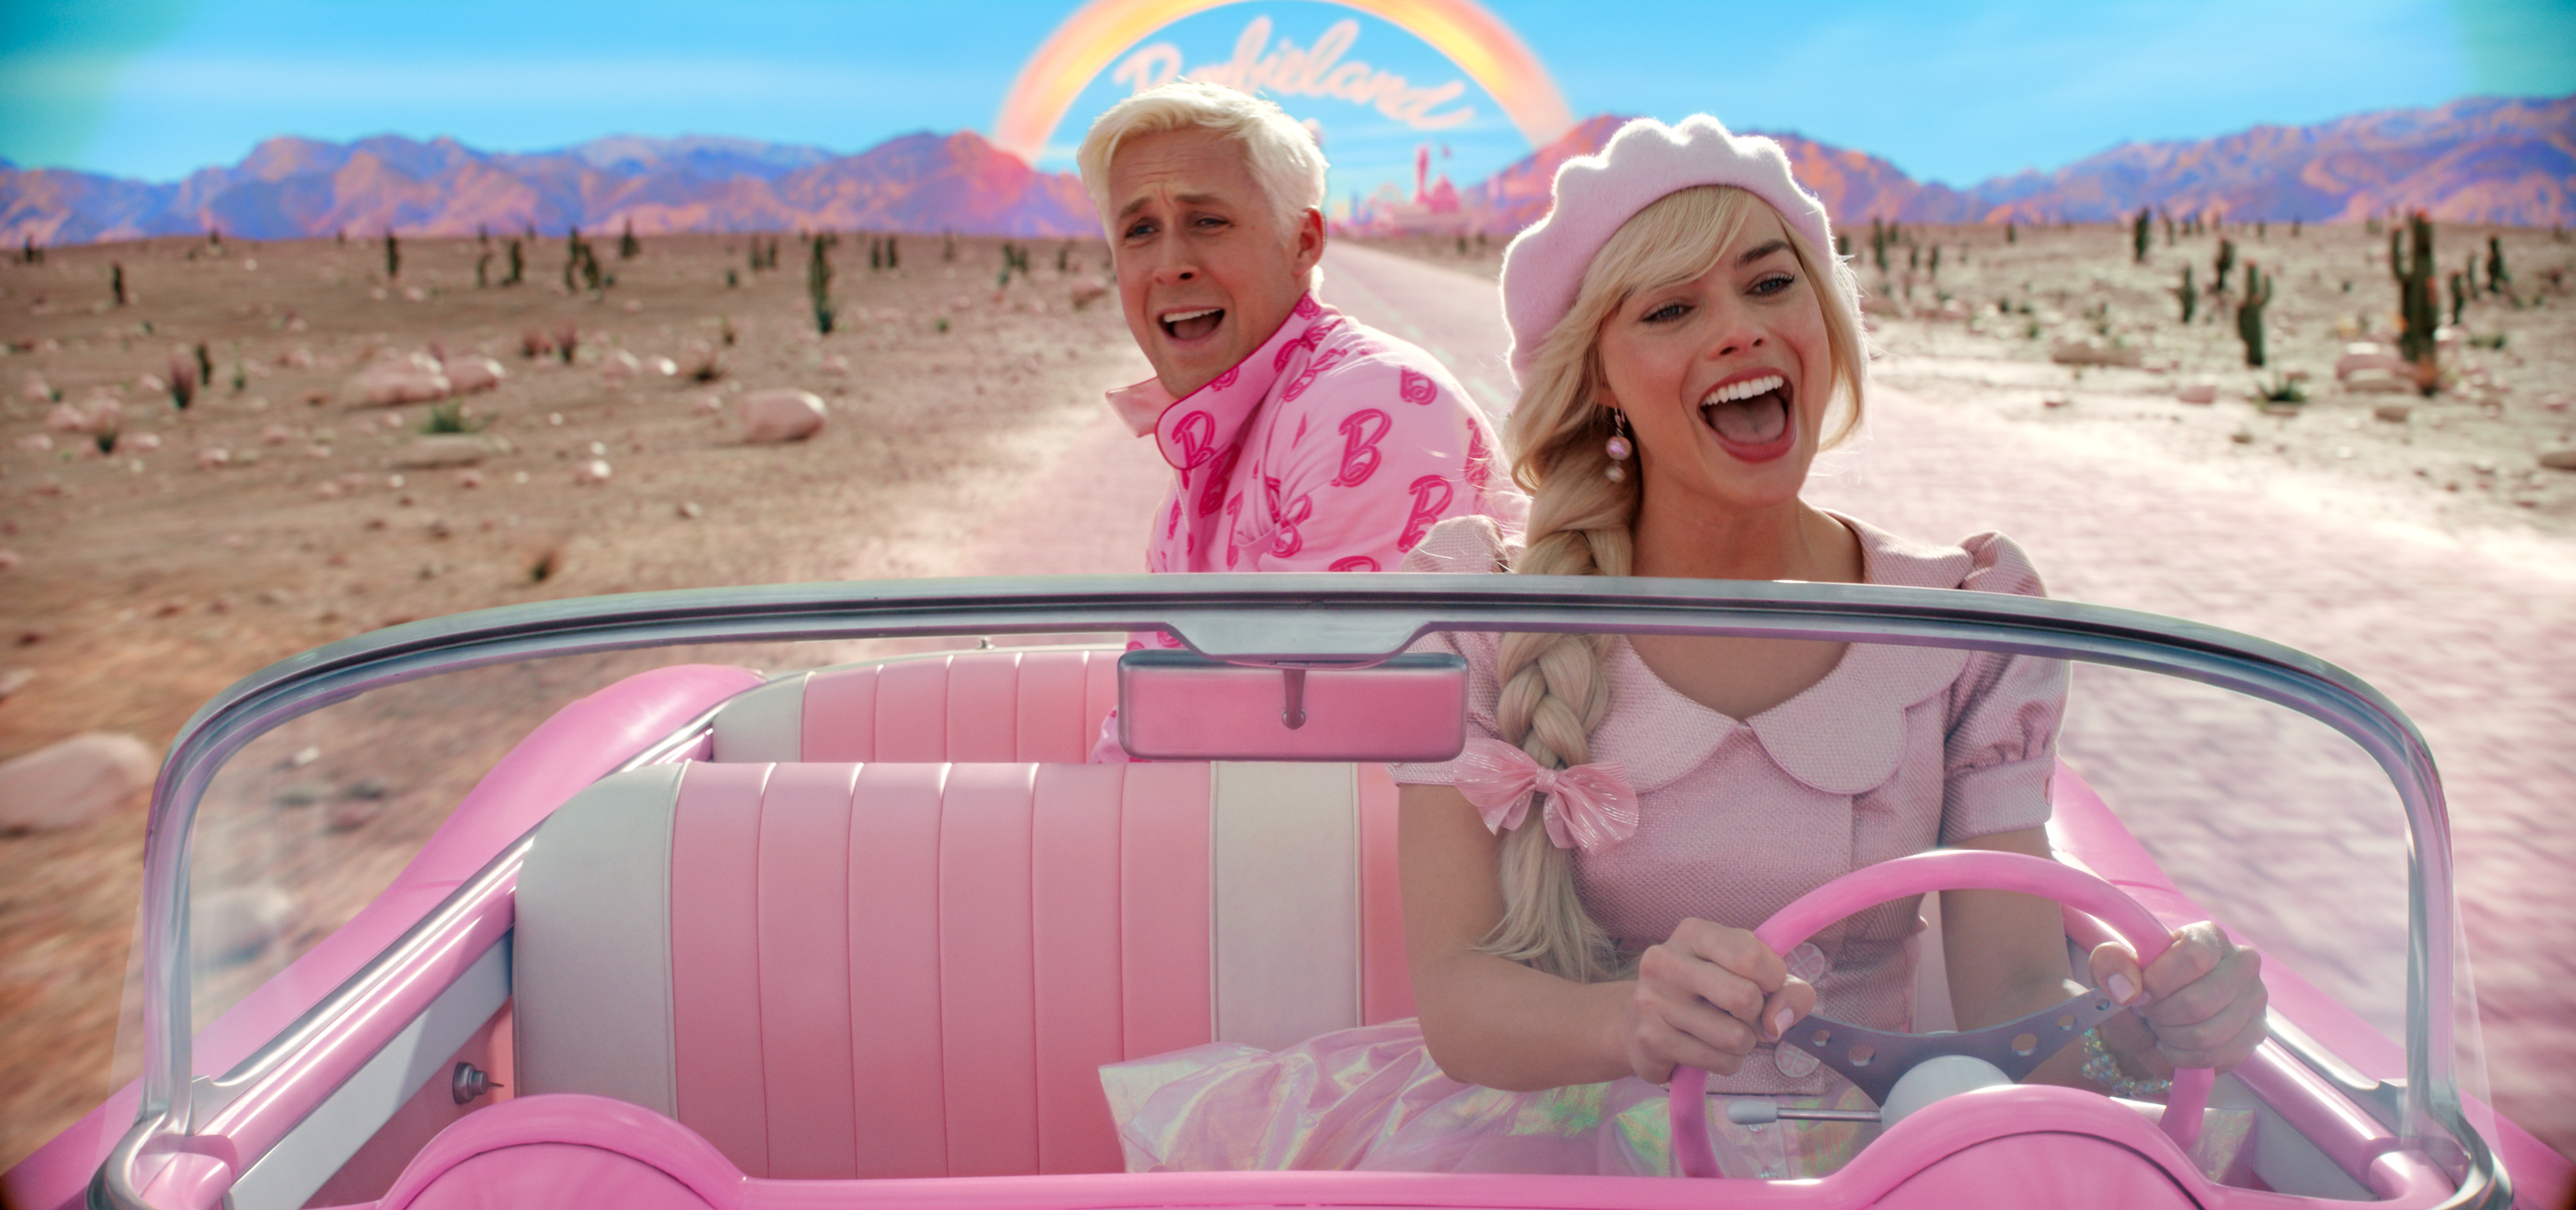 A woman in pink driving a pink convertible car with a man in pink in the backseat.